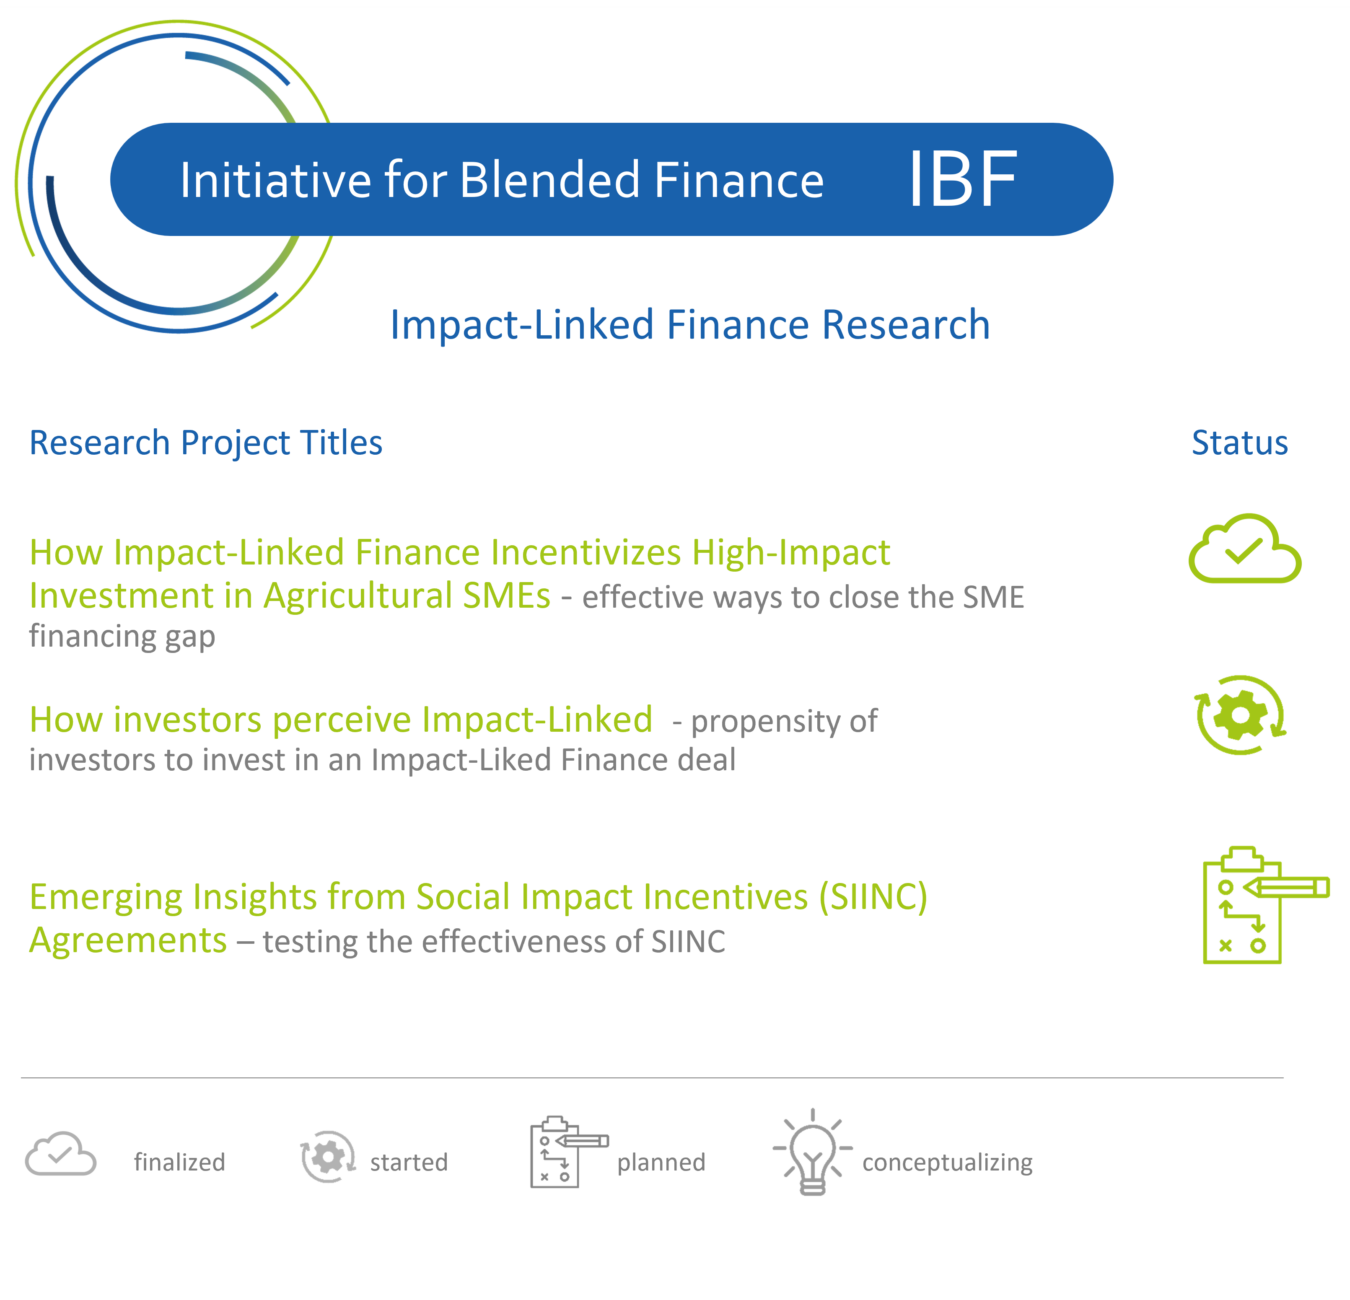 IBF Research Projects ILF 2022